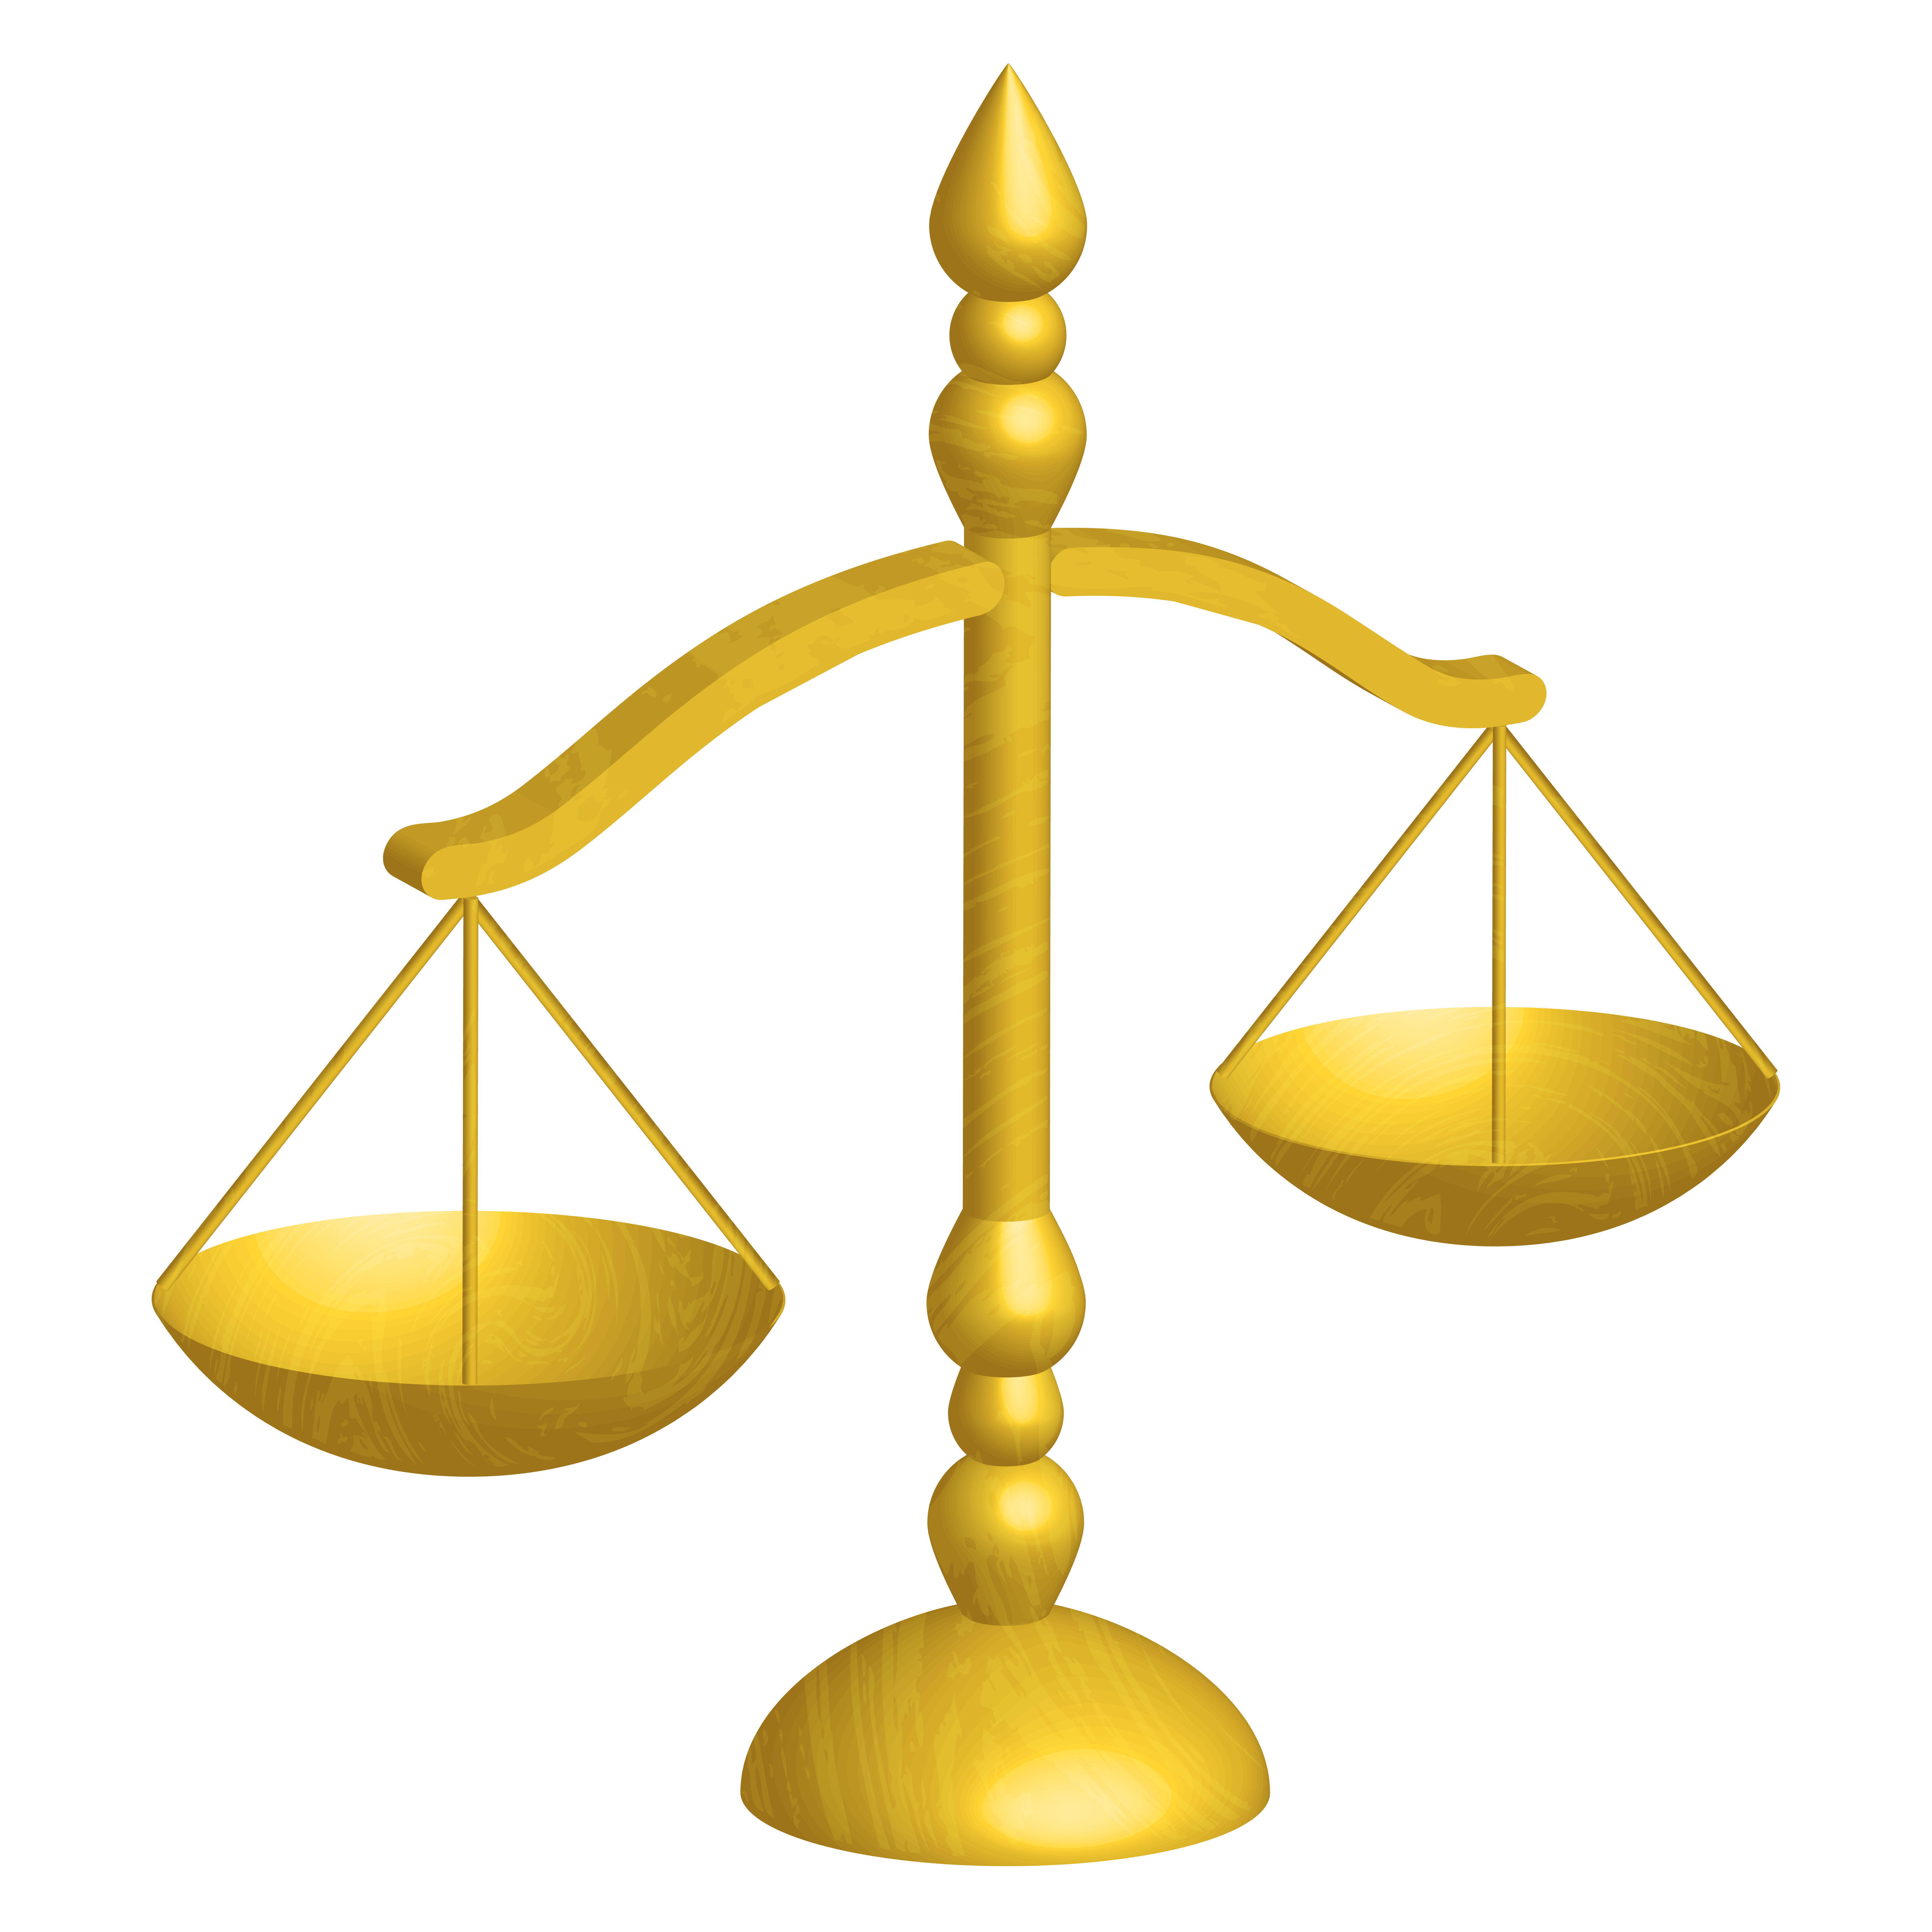 scales of justice clip art free download - photo #13